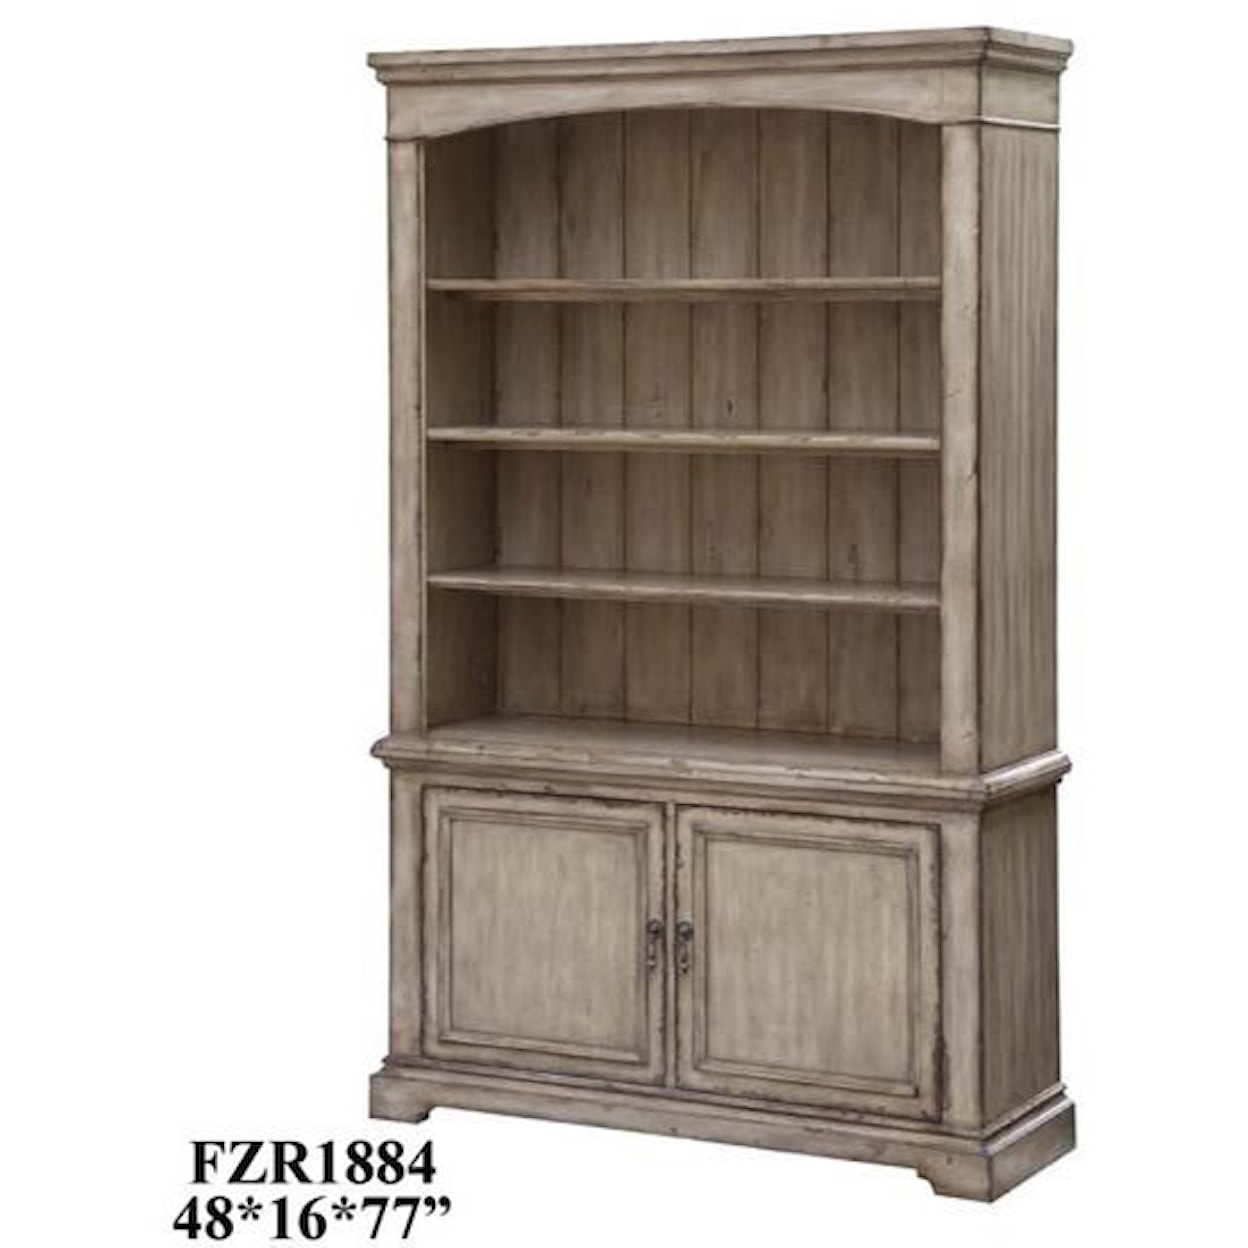 Crestview Collection Accent Furniture Brookhaven 2 Door / 3 Shelf Distressed Parch